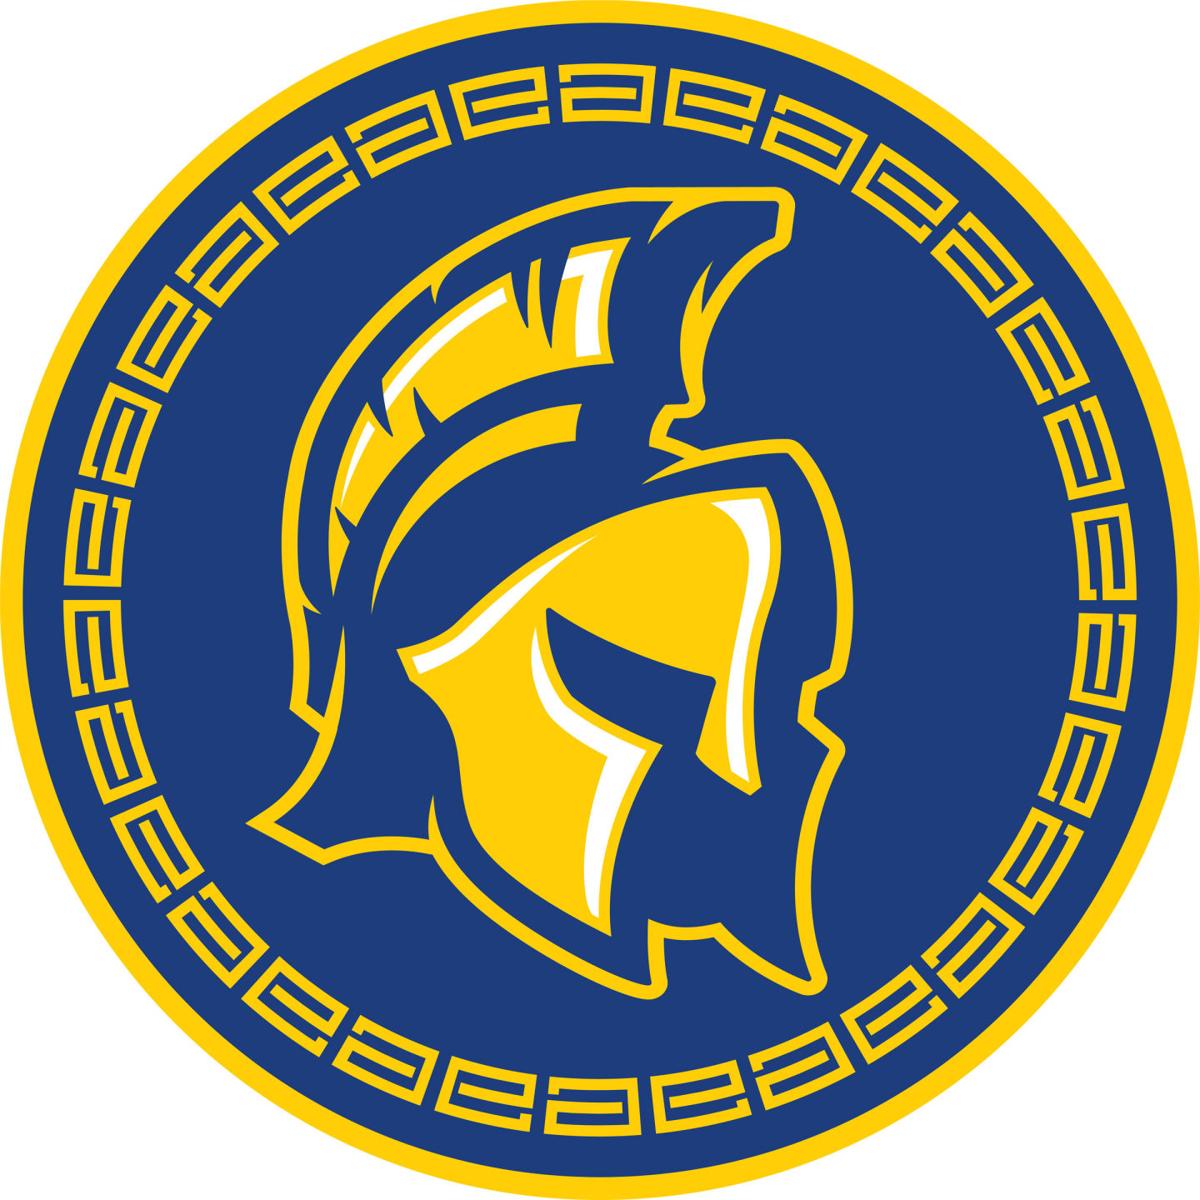 East Ascension High School develops new sports logo Ascension